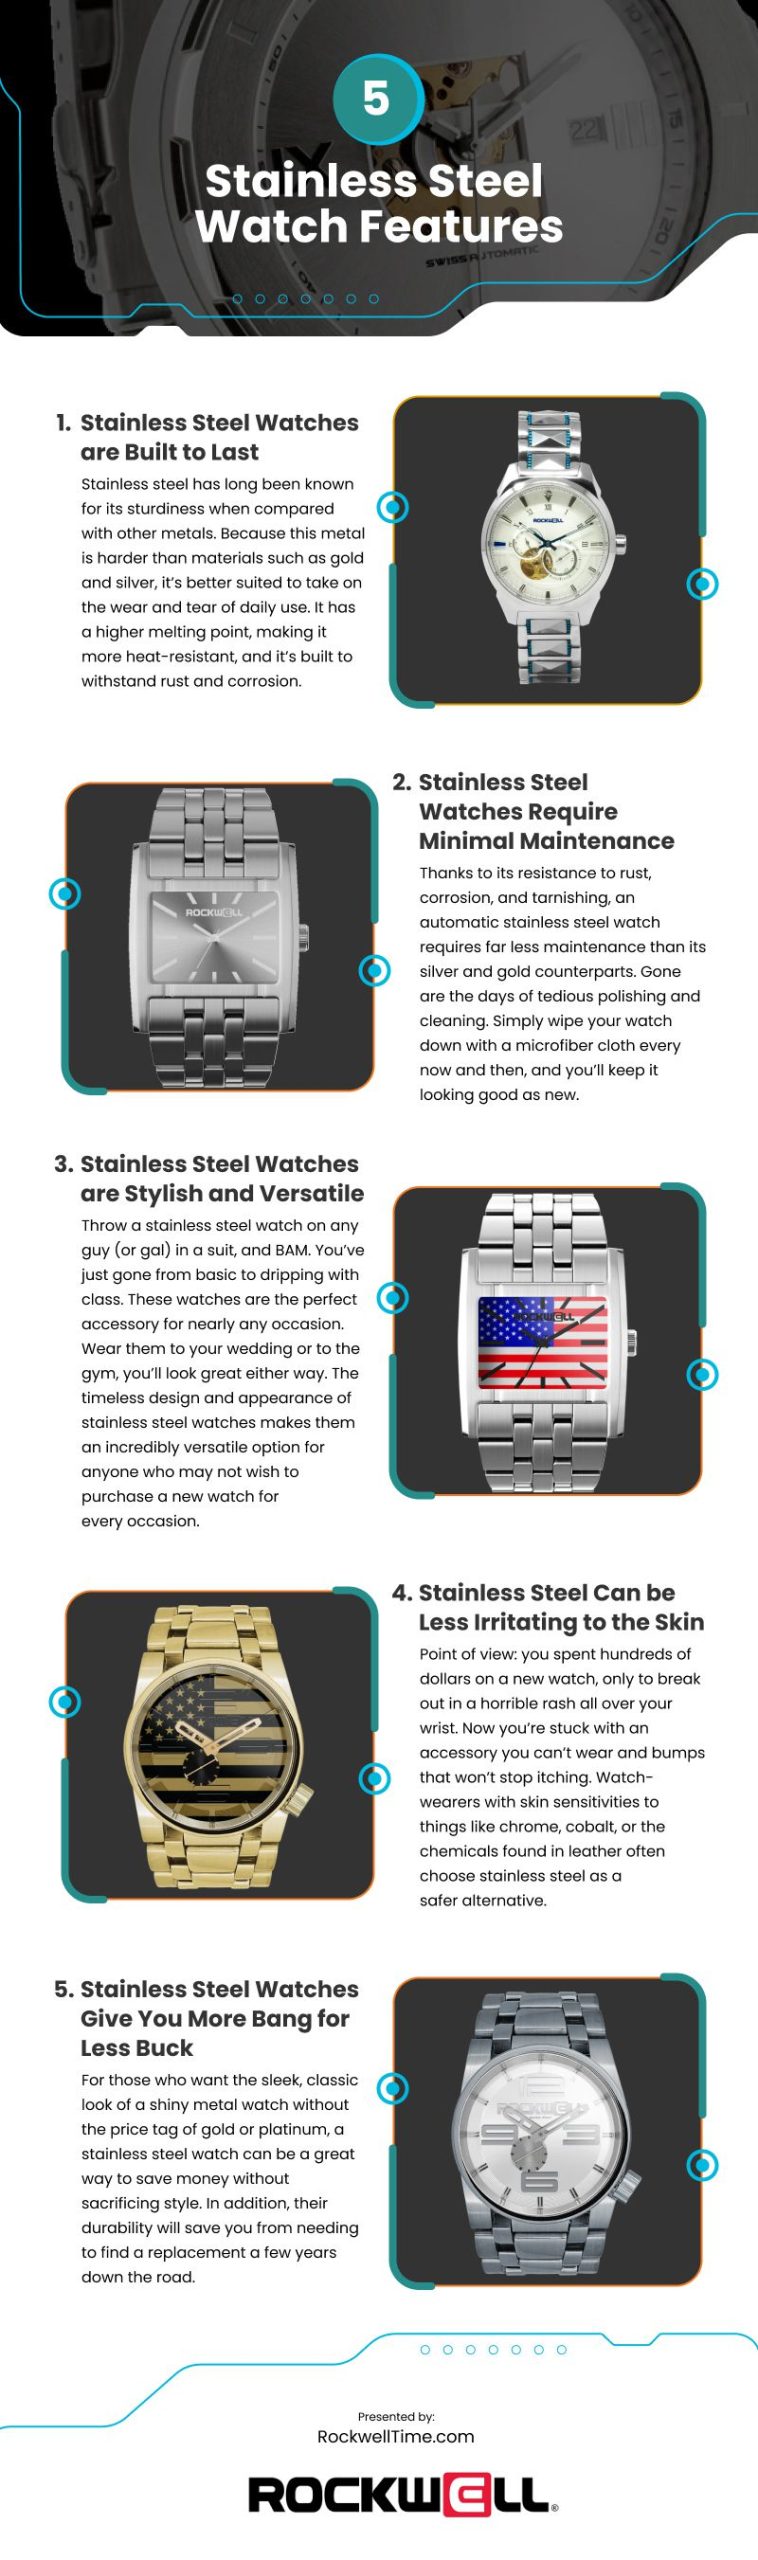 5 Stainless Steel Watch Features